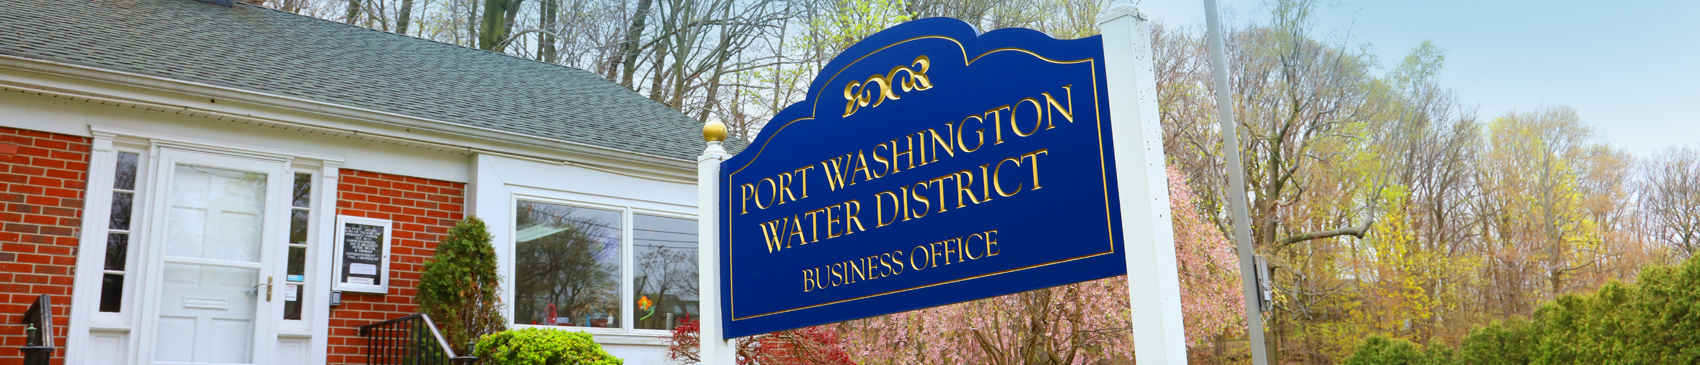 sign-up-for-email-updates-port-washington-water-district